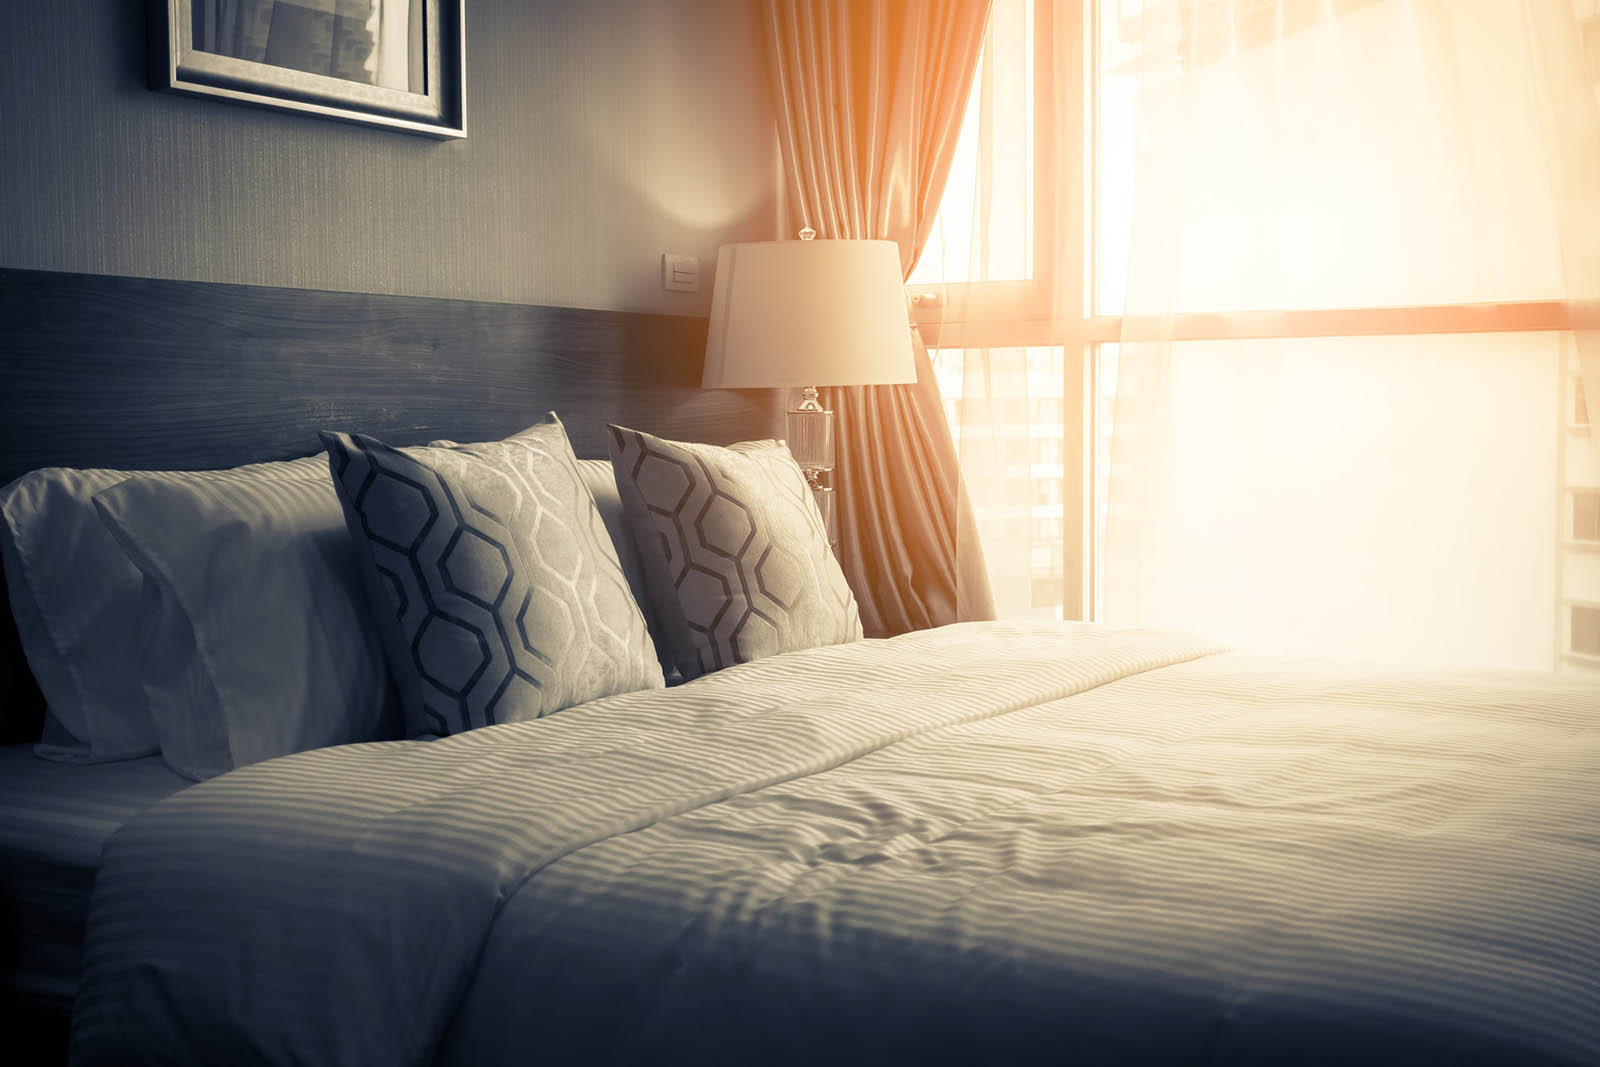 Take a Trip to New York City to Find Out Where You’ll Meet Your Soulmate Hotel Room Bed Morning